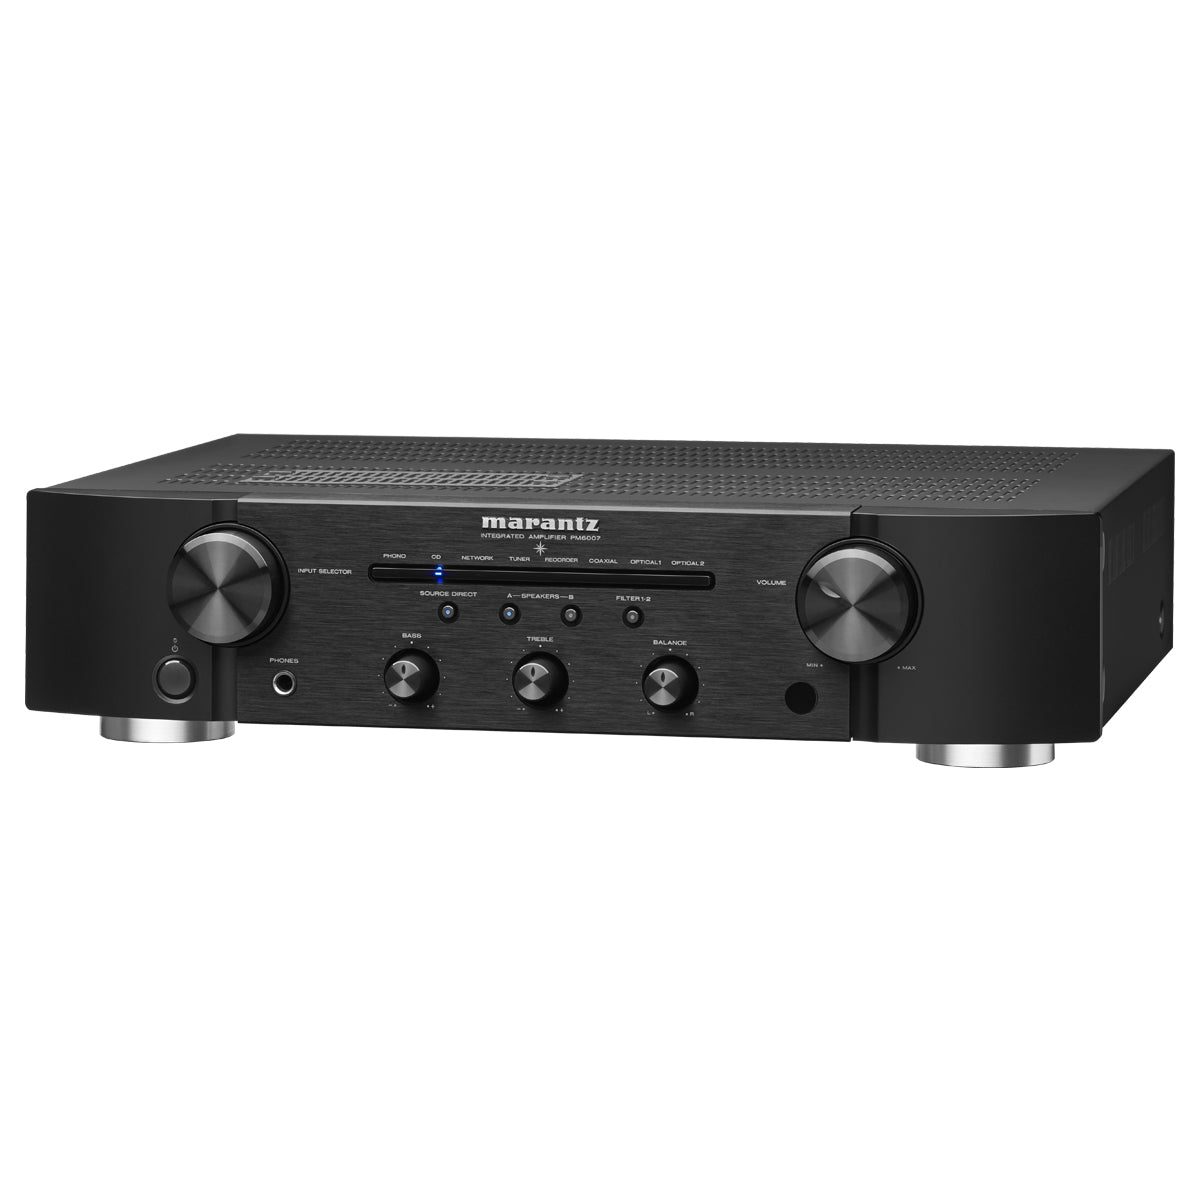 Marantz PM6007 Integrated Stereo Amplifier - The Audio Experts